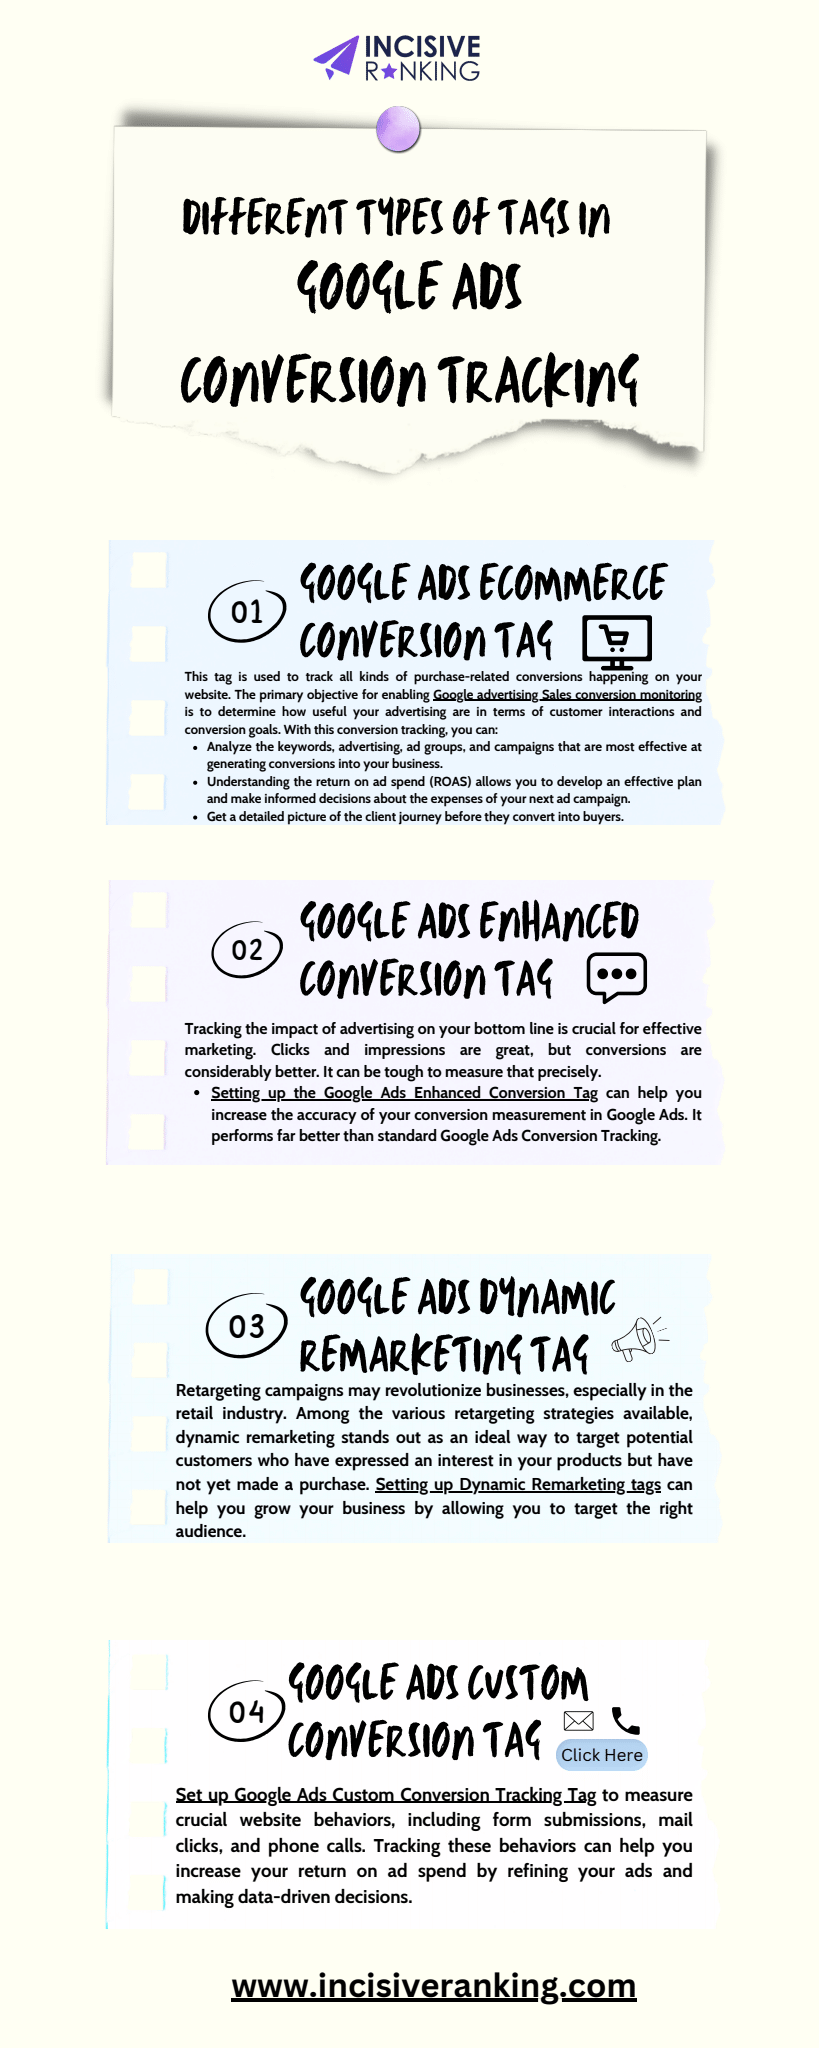 Dropbox - Different Types of Tags in Google Ads Conversion Tracking- Incisiveranking.pdf - Simplify your life